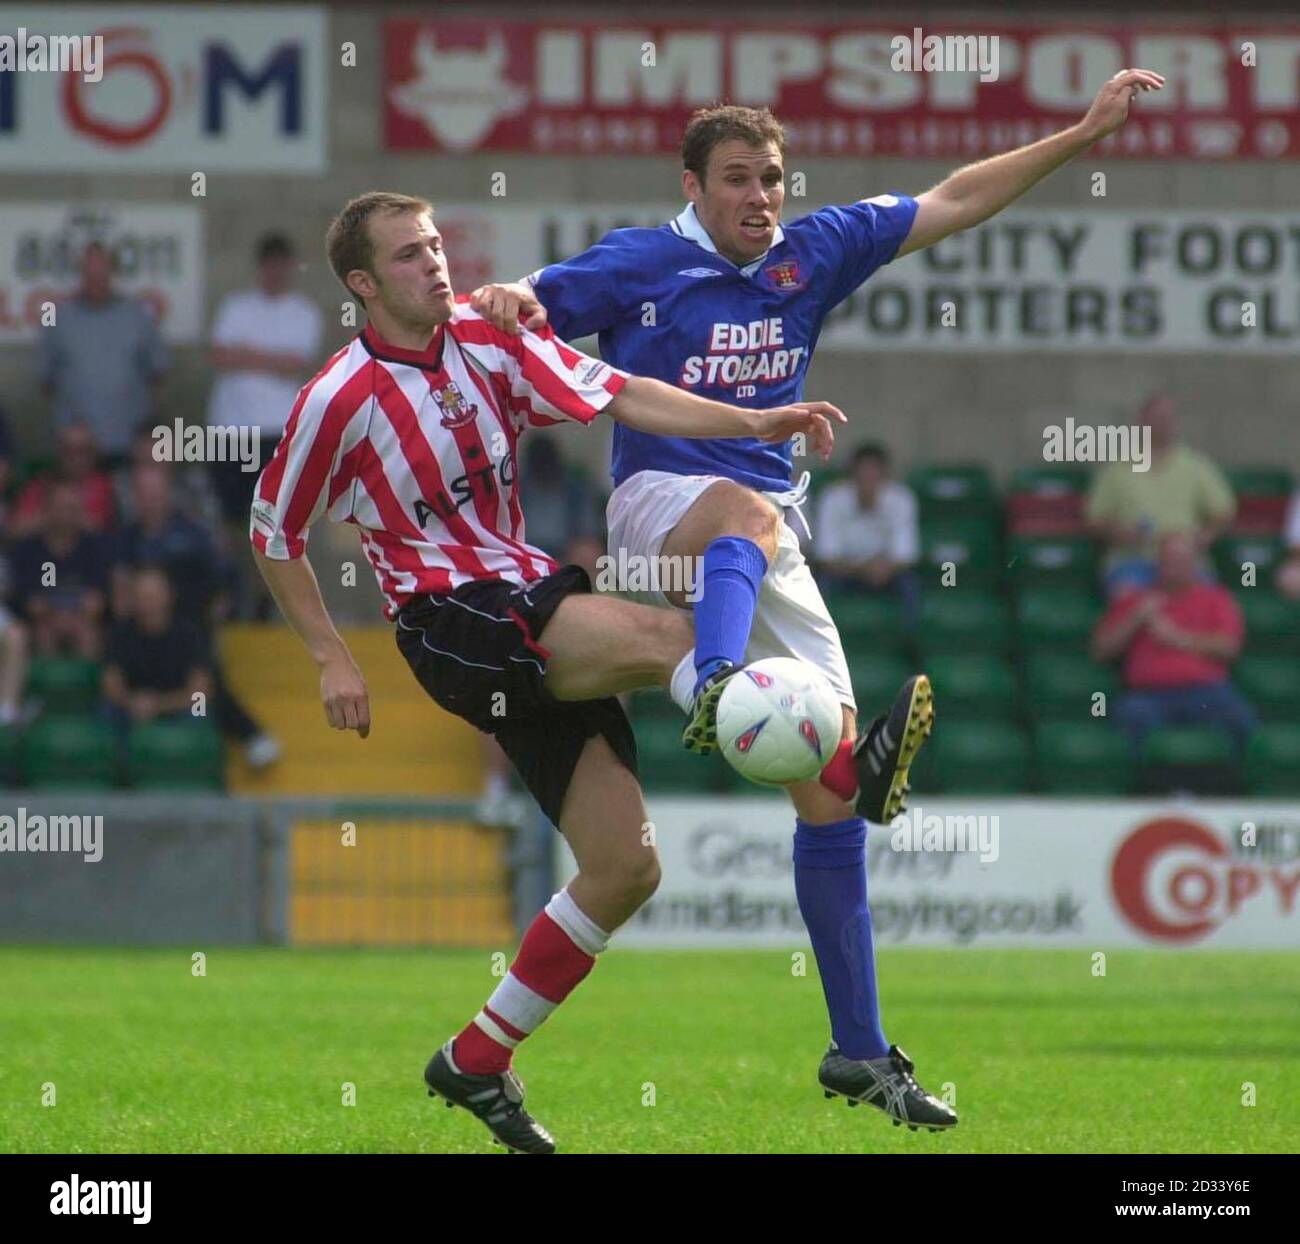 Lincoln's Paul Smith (left) and Carlisle's Lee Madison in action, during  their Nationwide Division Three match at Lincoln's Sincil Bank ground.  Carlisle beat Lincoln 1-0. THIS PICTURE CAN ONLY BE USED WITHIN